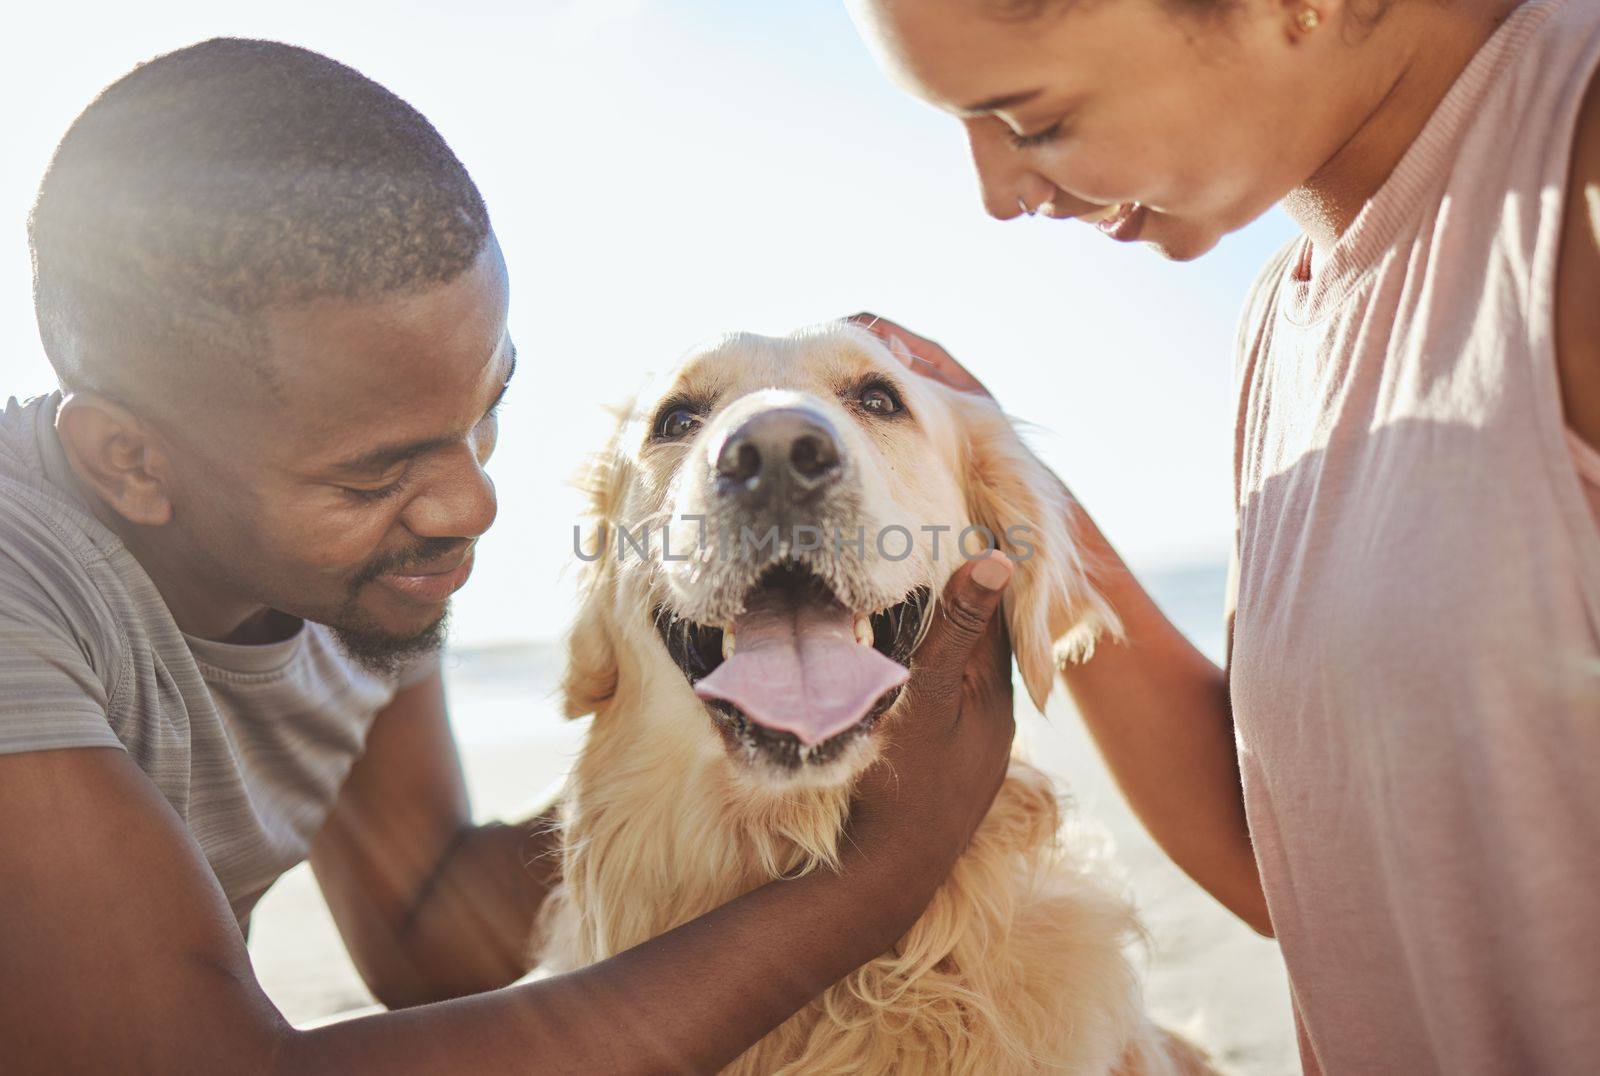 Couple, dog and love, together at beach for fun trip, happy and pets animal with care. Bonding, spending quality time and black man with woman by the ocean on adventure with golden retriever puppy